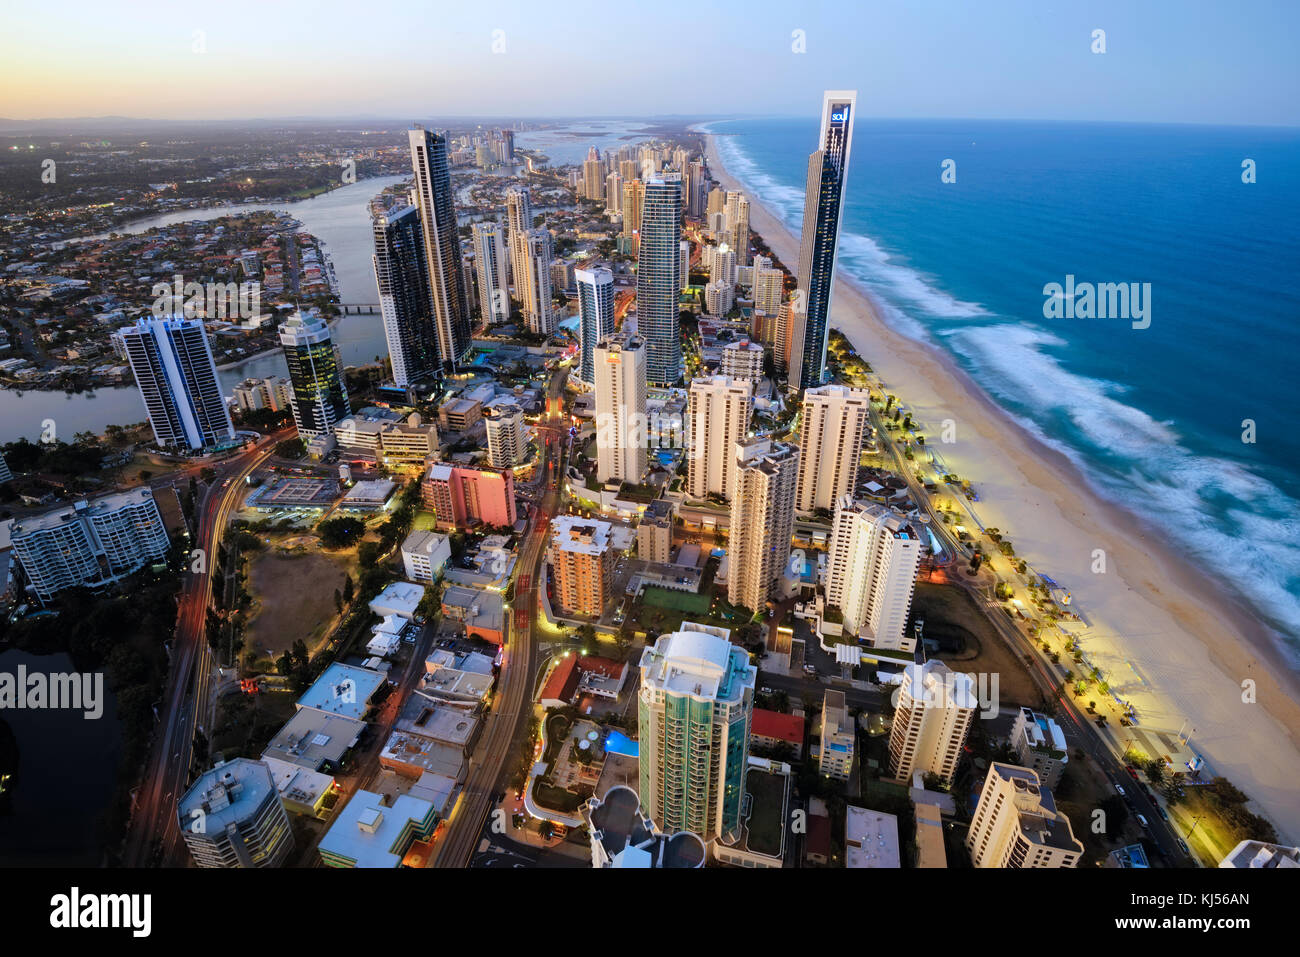 View of the Surfers Paradise on the Gold Coast, Queensland, Australia from the SkyPoint Observation Deck at Q1 Building. Stock Photo